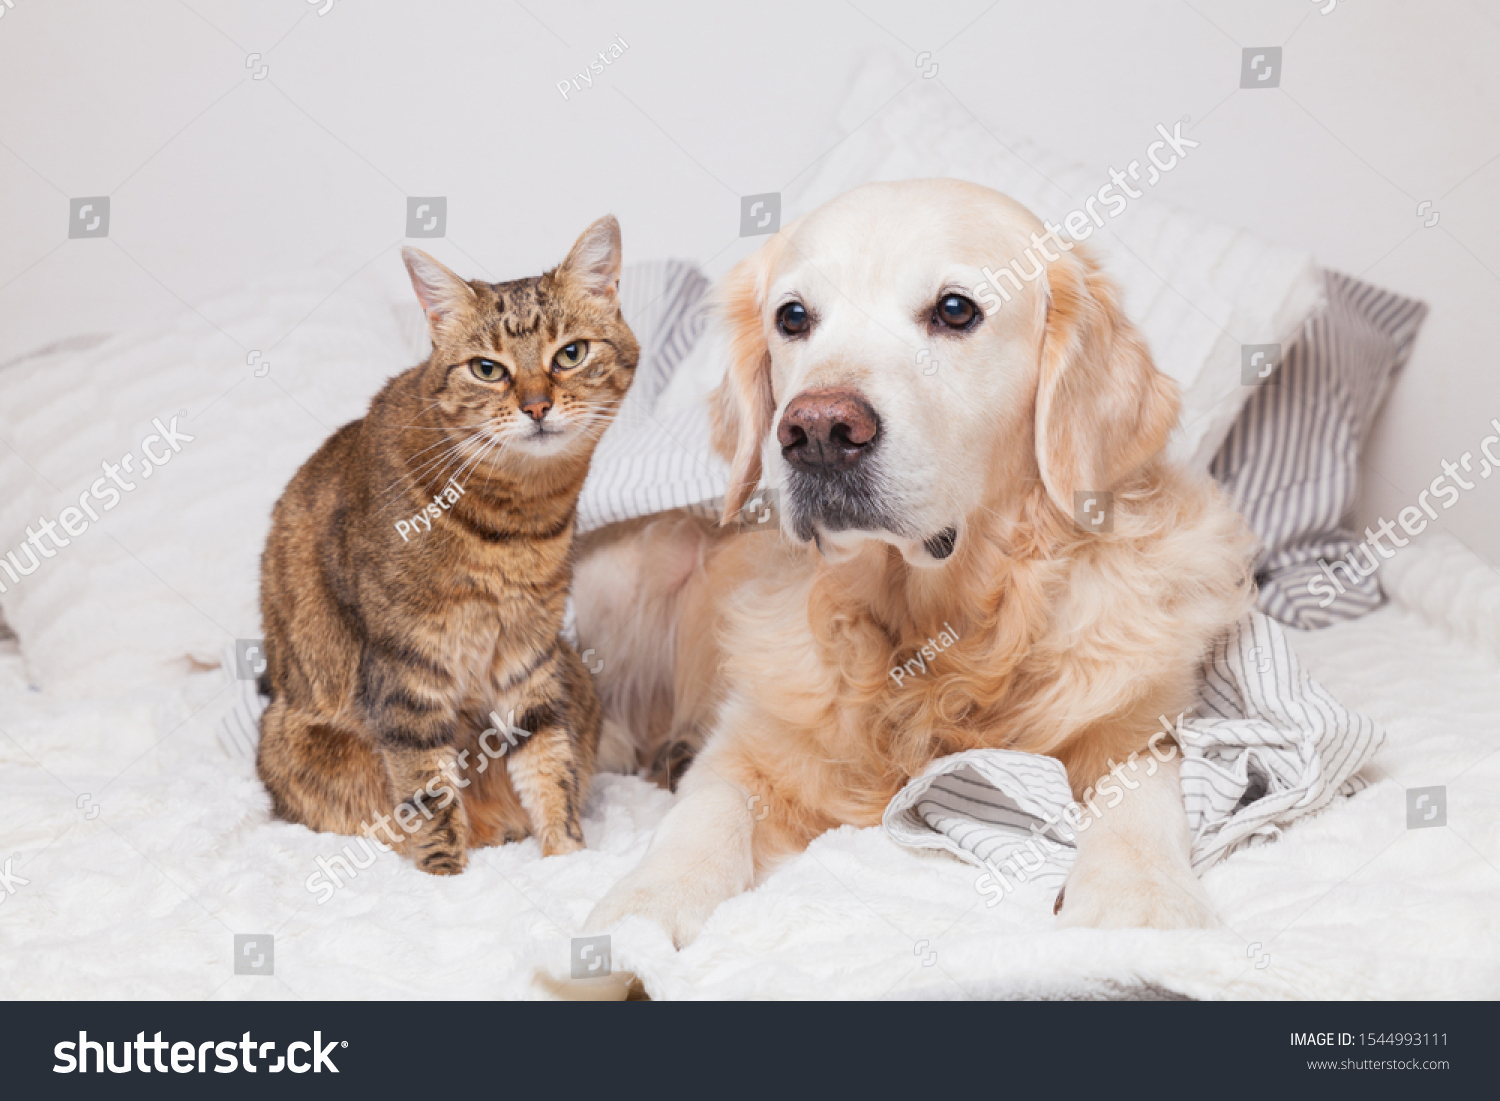 Happy young golden retriever dog and cute mixed breed tabby cat under cozy  plaid. Animals warms under gray and white blanket in cold winter weather. Friendship of pets. Pets care concept. #1544993111